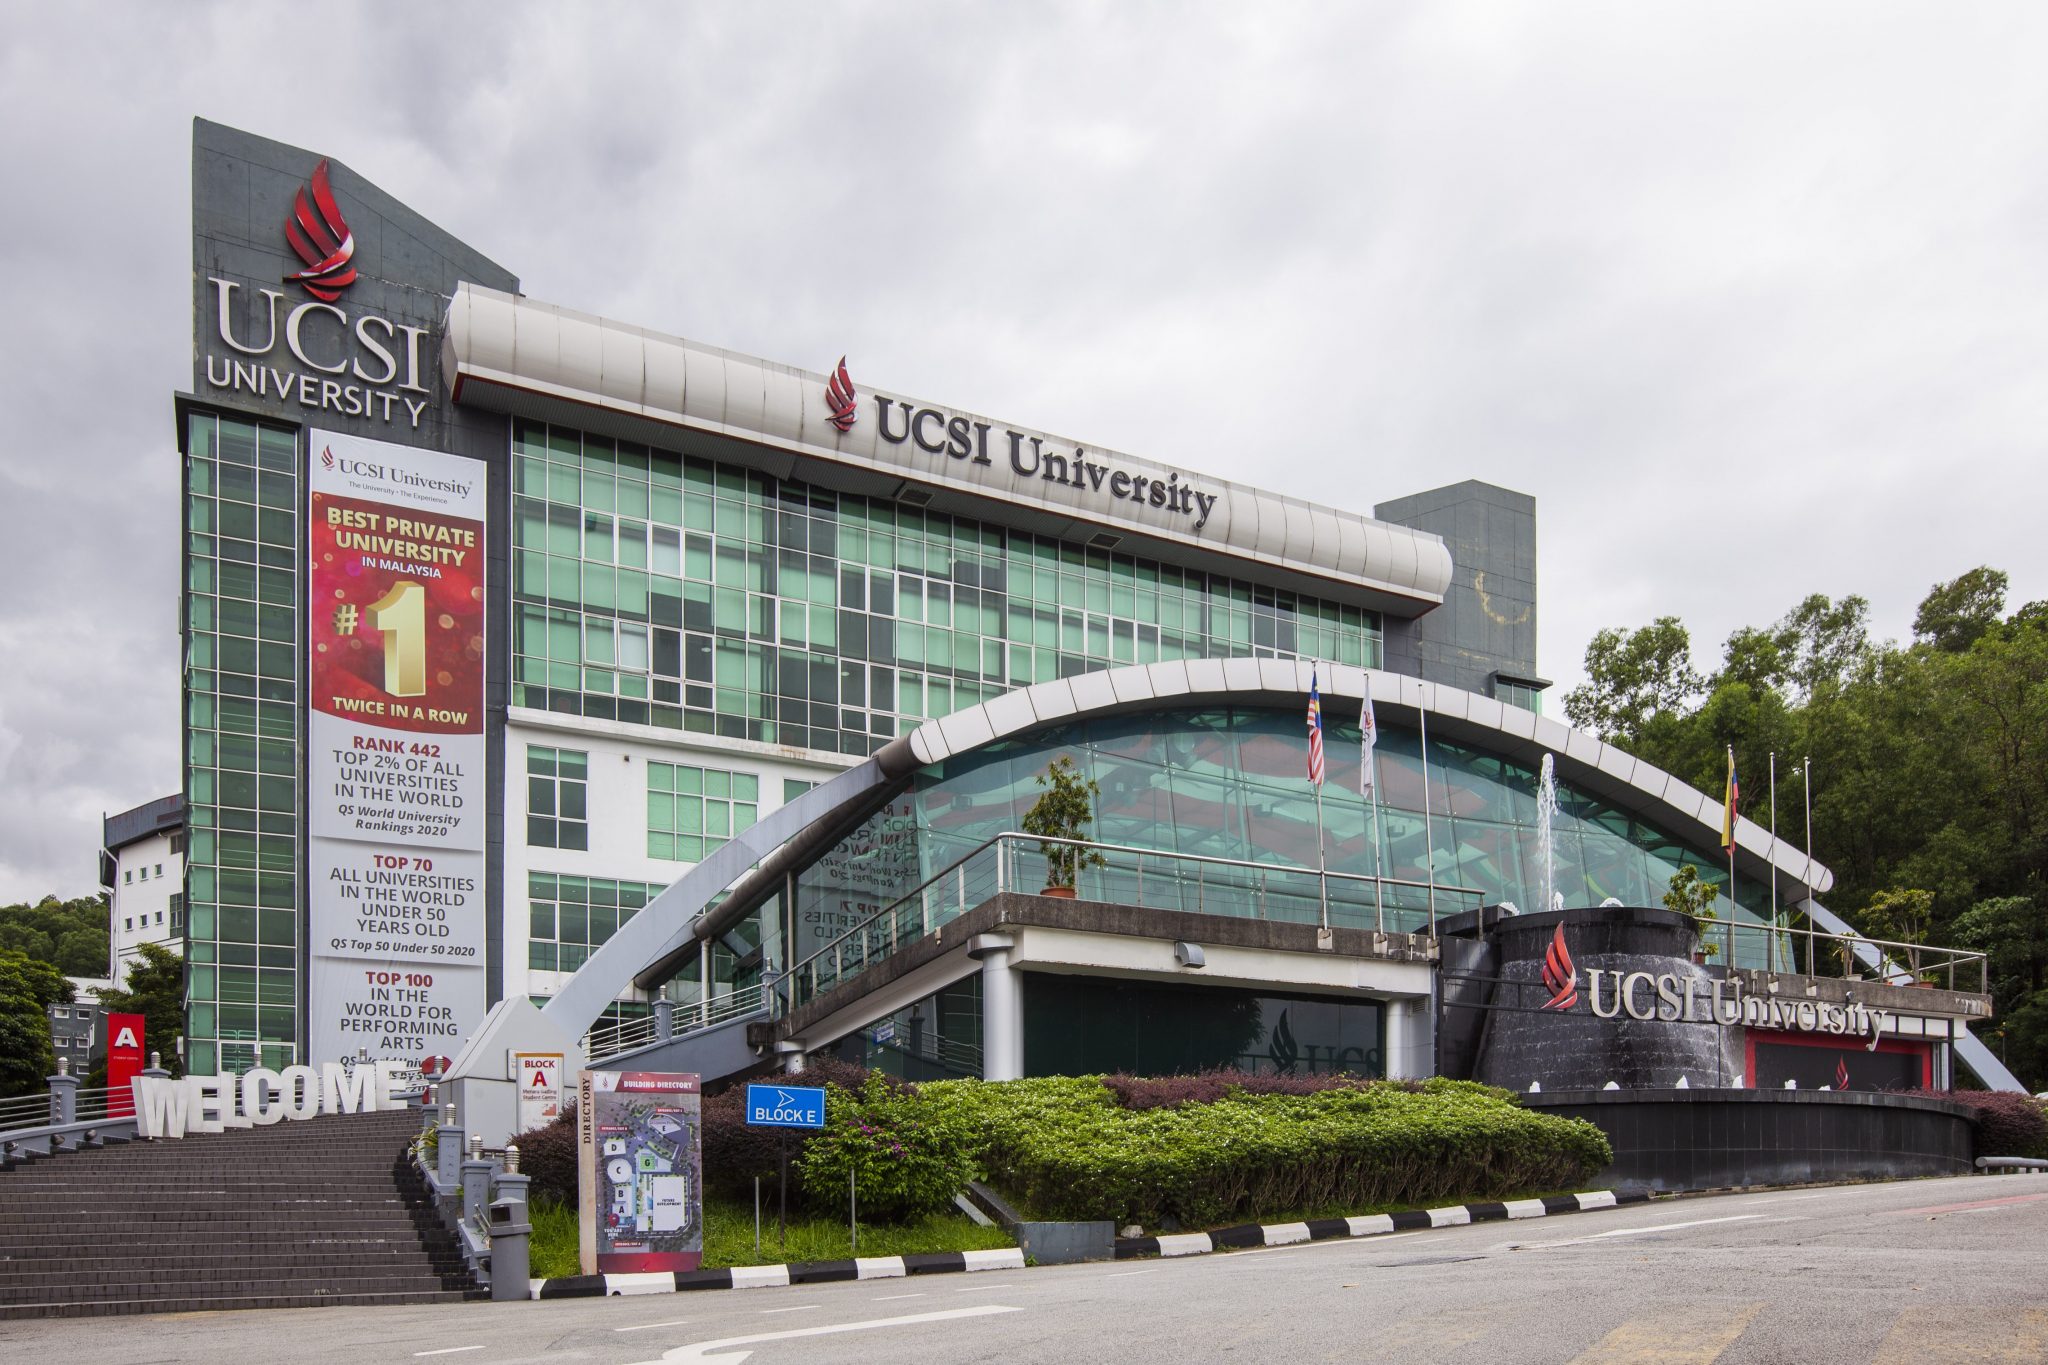 Top 10 Private Universities in Malaysia According to QS Rankings 2022